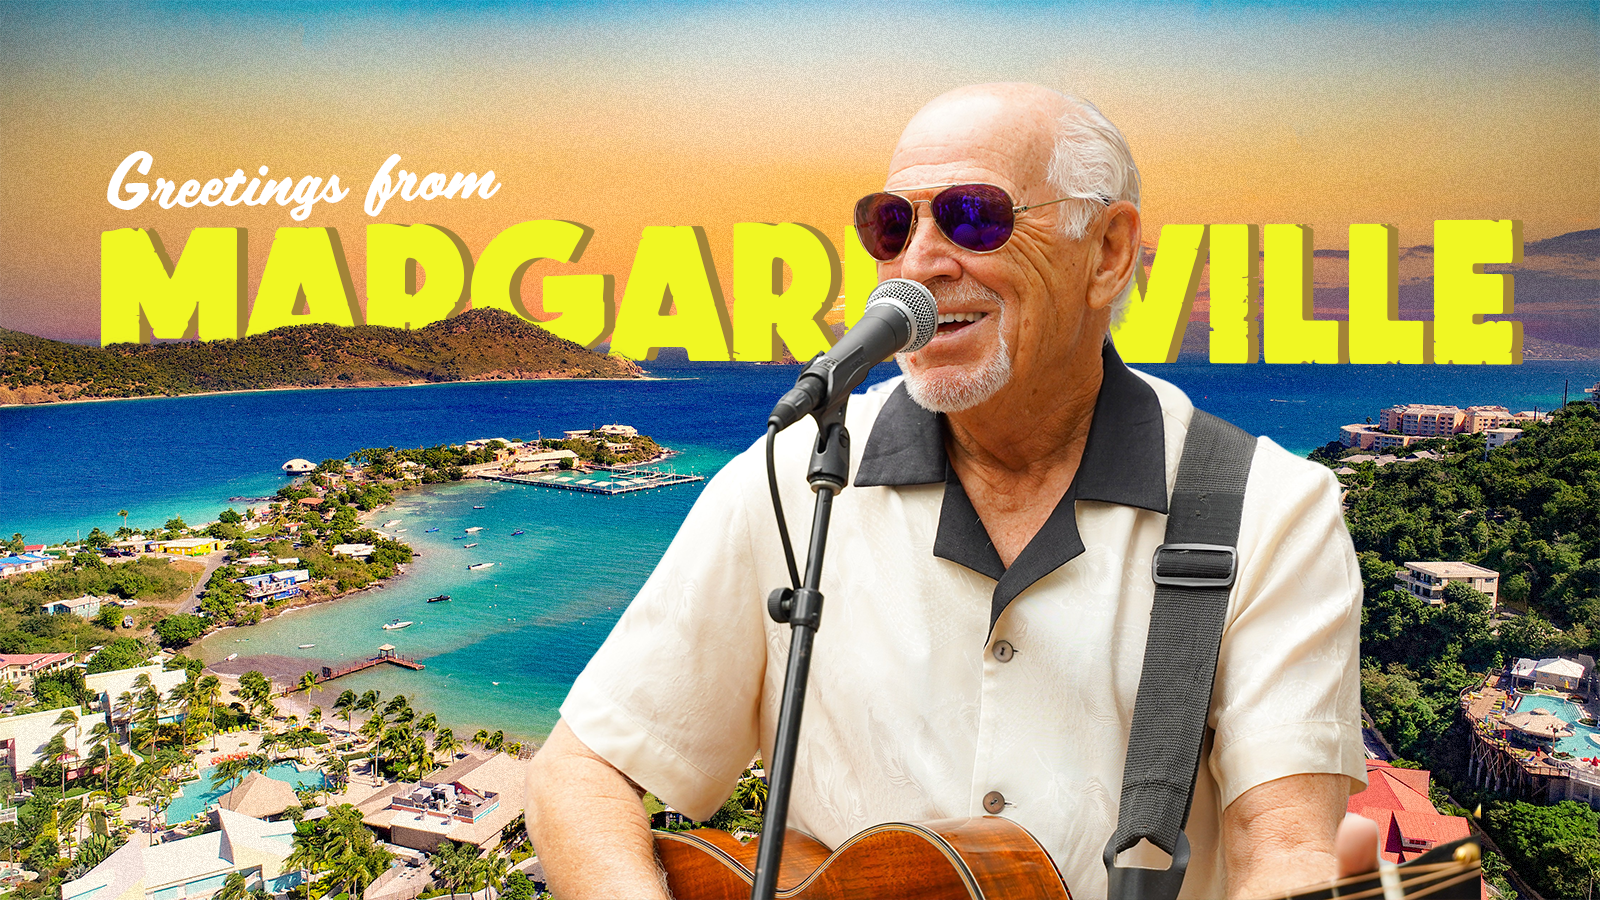 A man in sunglasses and a guitar in front of a microphone in front of a beachy background with the words “Greetings from Margaritaville” behind him.